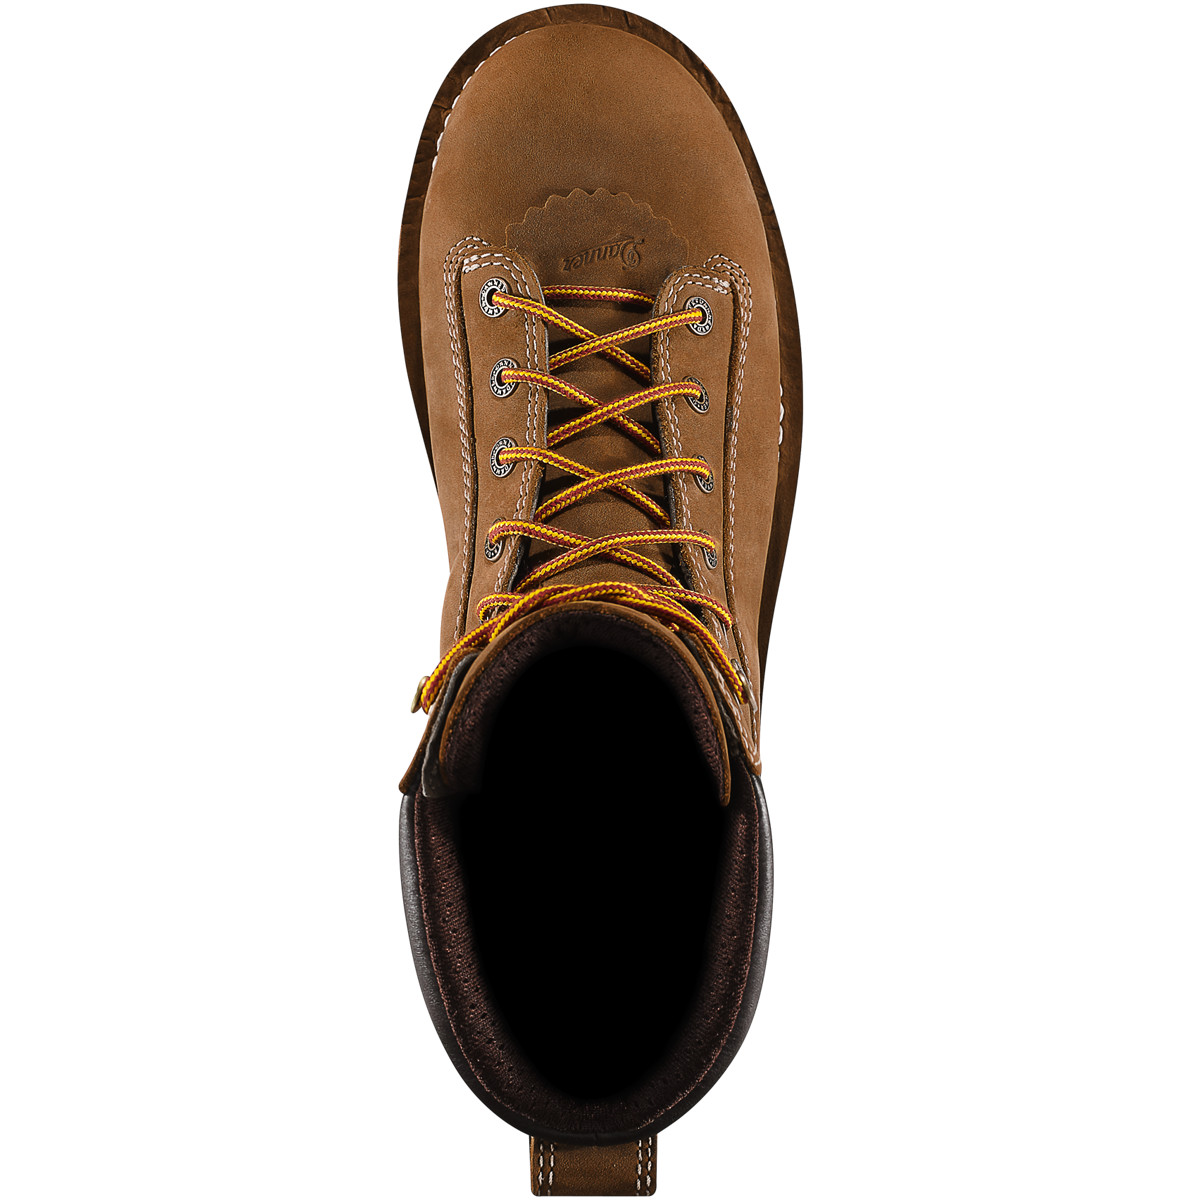 Danner Men's 17315 Quarry USA 8" Brown Gore-Tex WP Leather EH Safety Work Boots